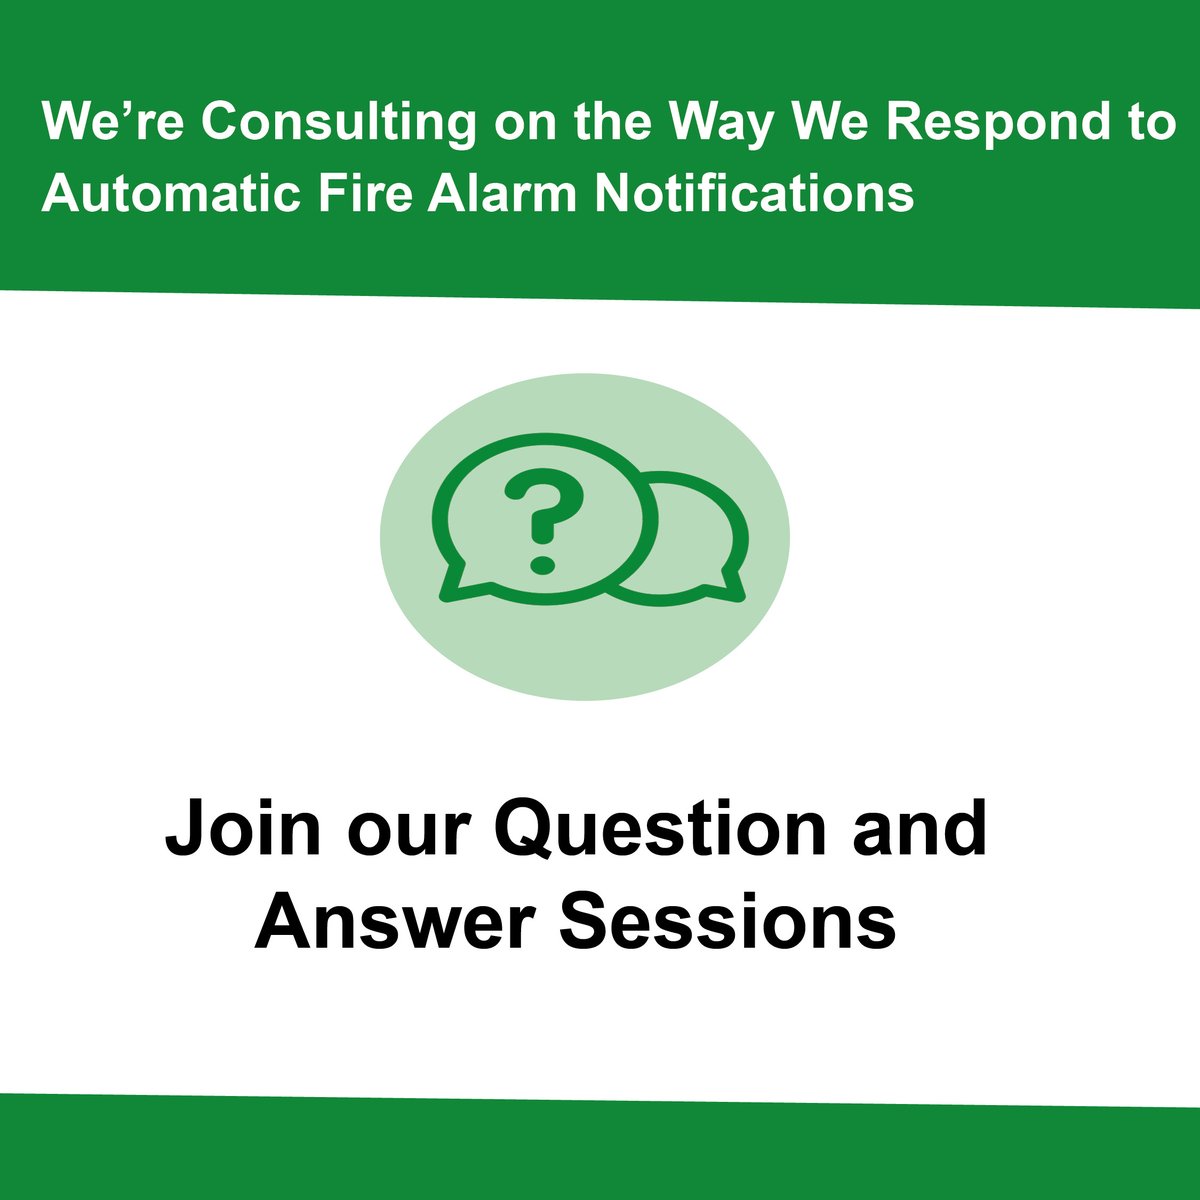 We have added more Q&A session dates for our Automatic Fire Alarms consultation: 📅 1 May 2024 between 4pm-5pm; 📅 7 May 2024 between 2pm-3pm; and 📅 9 May 2024 between 12pm-1pm. You can register to attend ➡️ow.ly/MSLx50Rc4jy